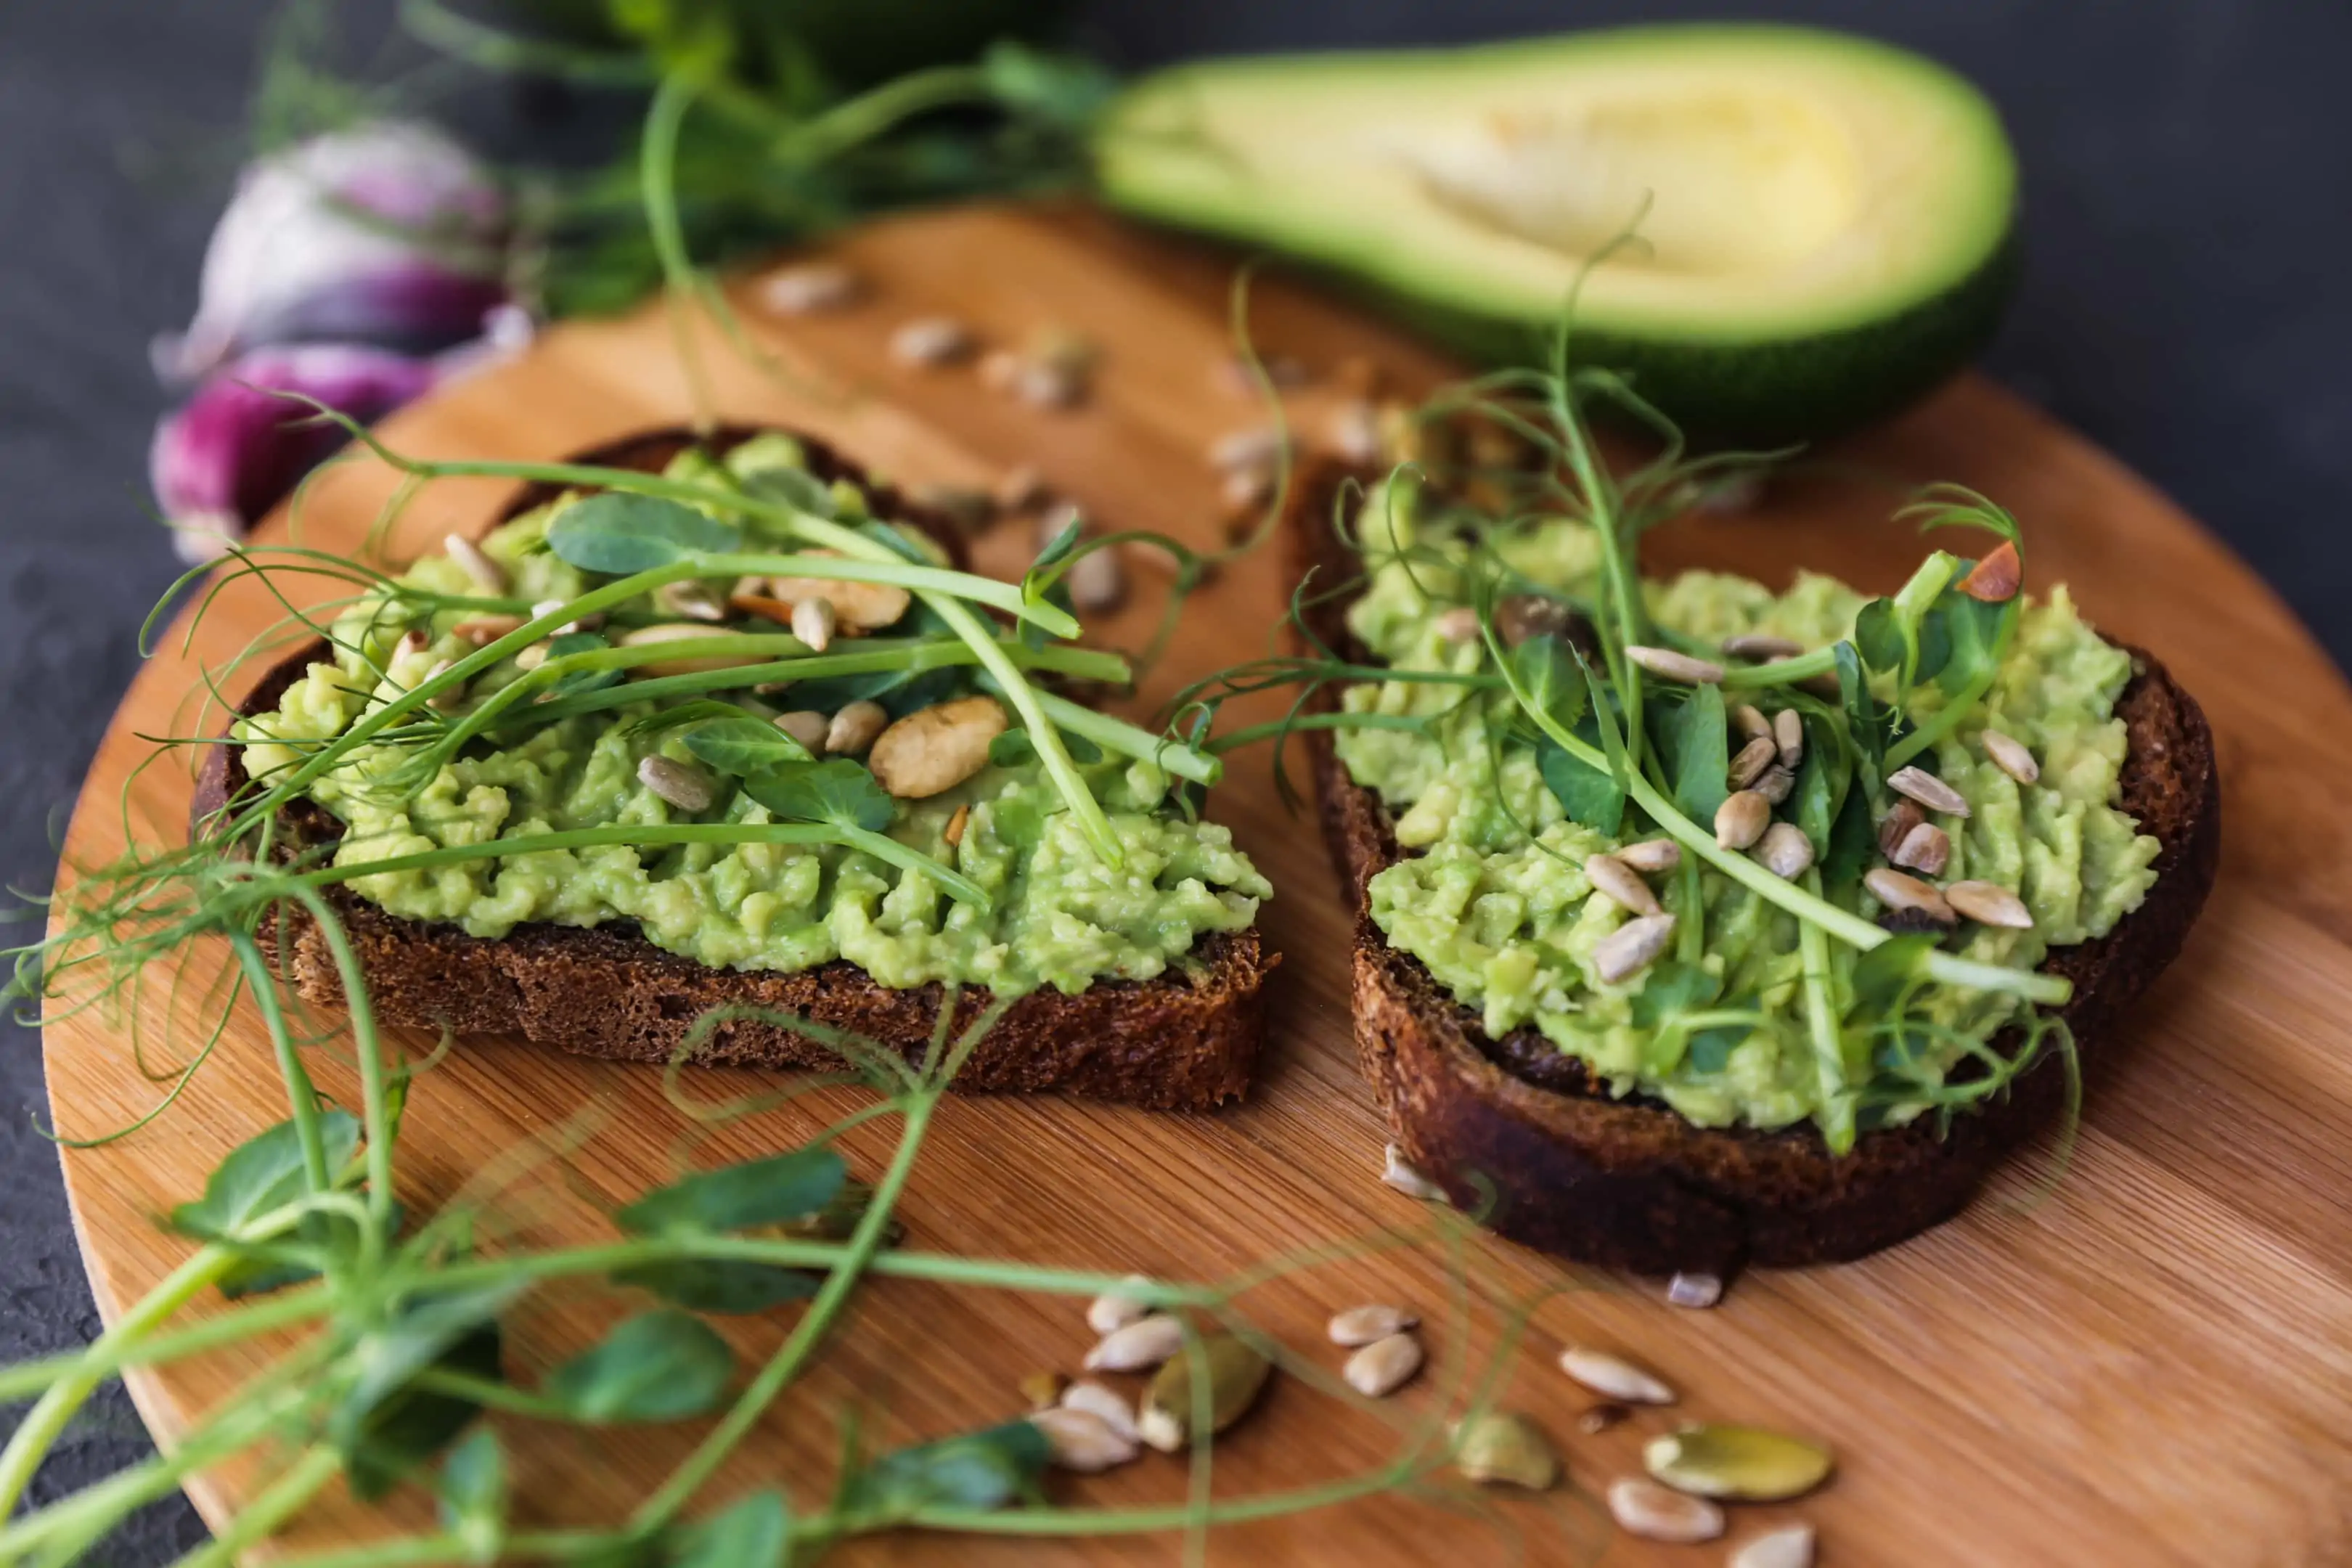 Toast with avocado and microgreens. Avocado is on our list of foods for eye cataracts.